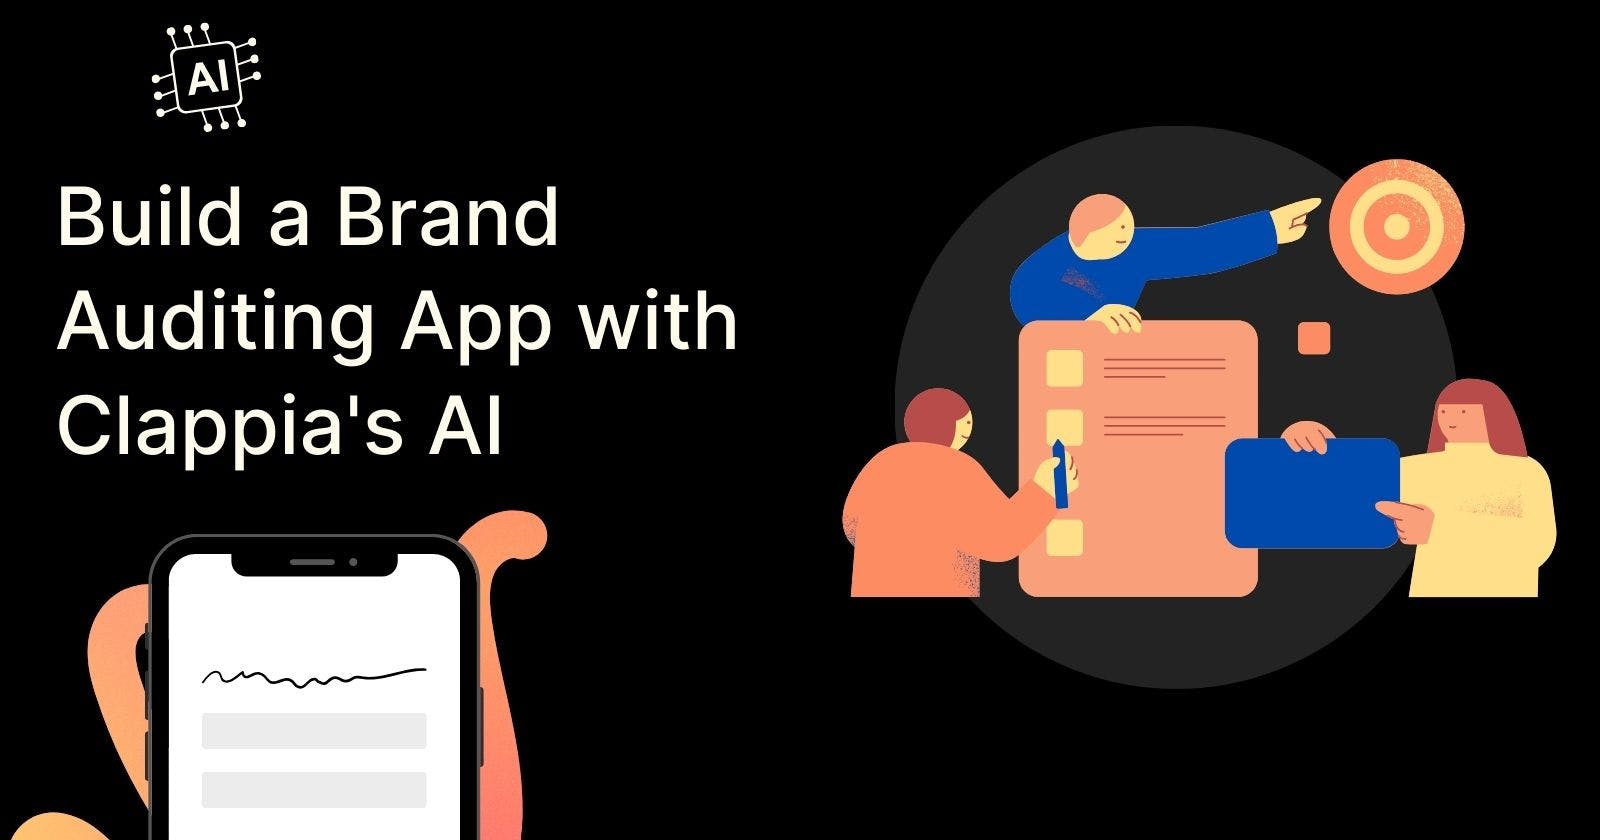 How to Build a Brand Auditing App?